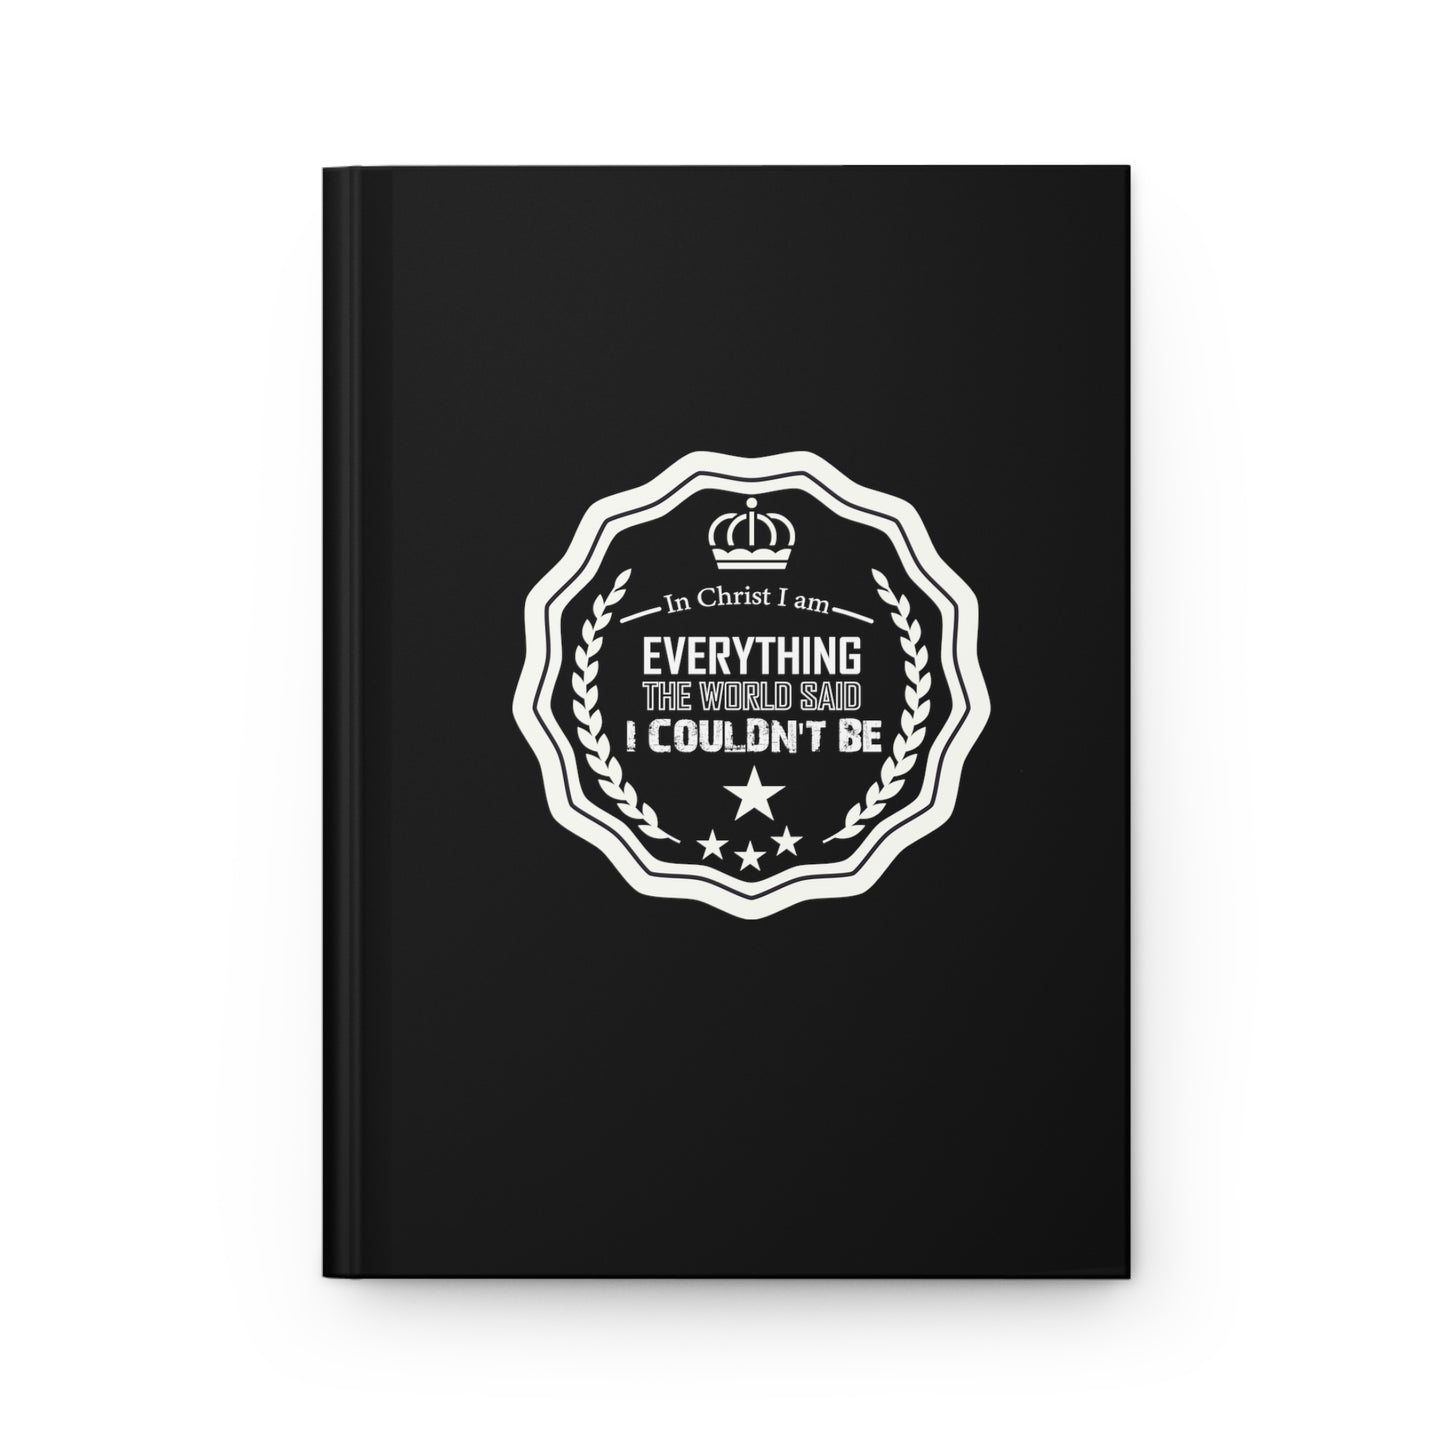 In Christ I Am Everything The World Said I Couldn't Be  Hardcover Journal Matte